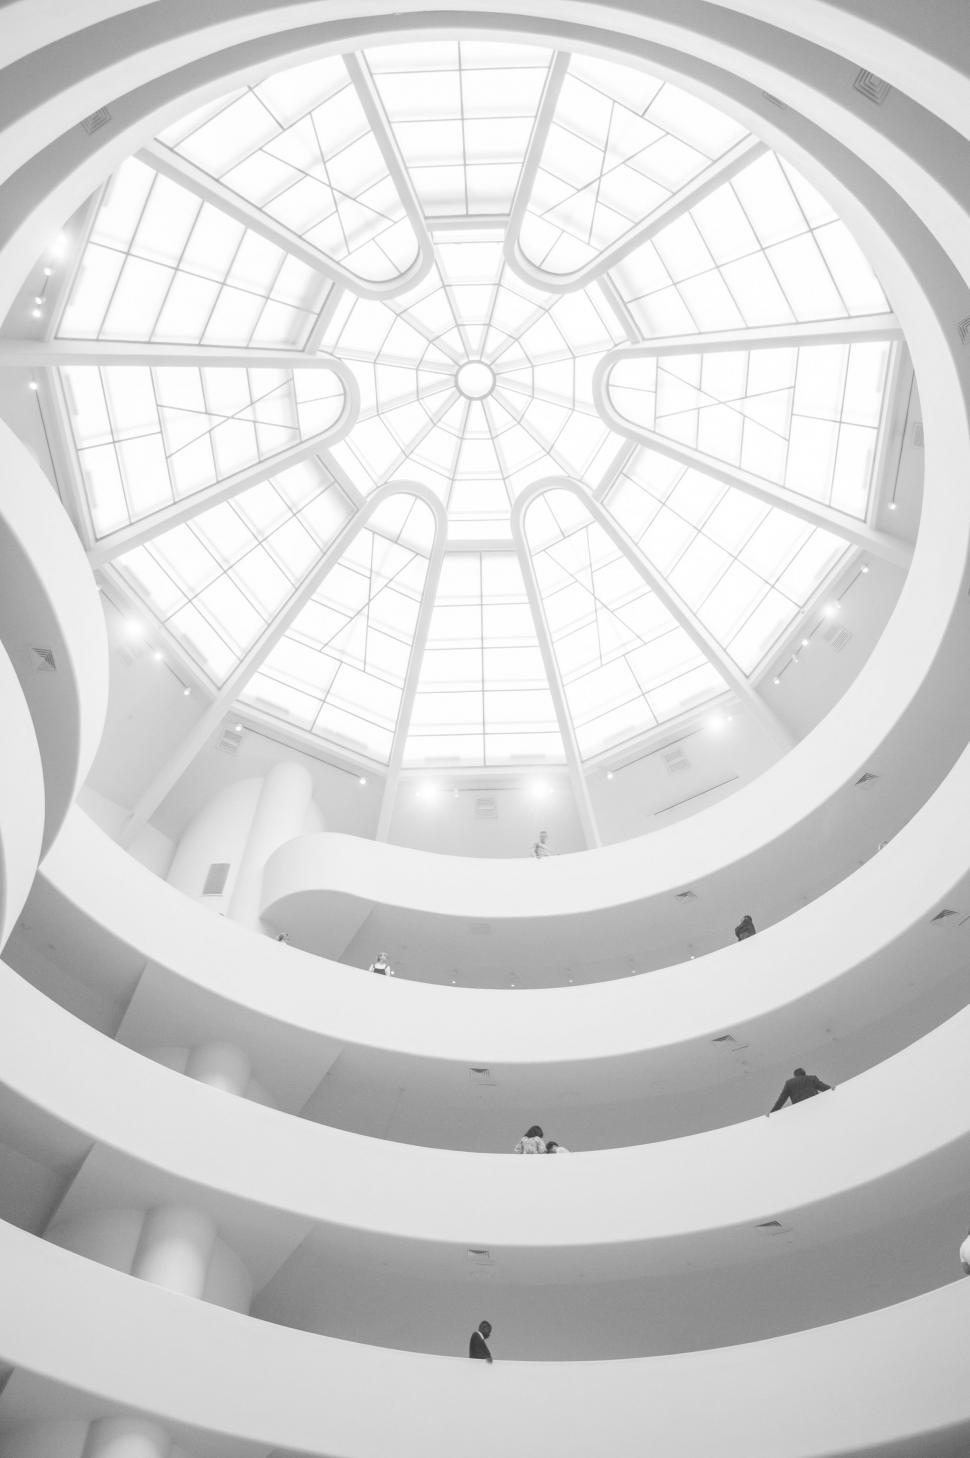 Free Image of Large Circular Building With Skylight 